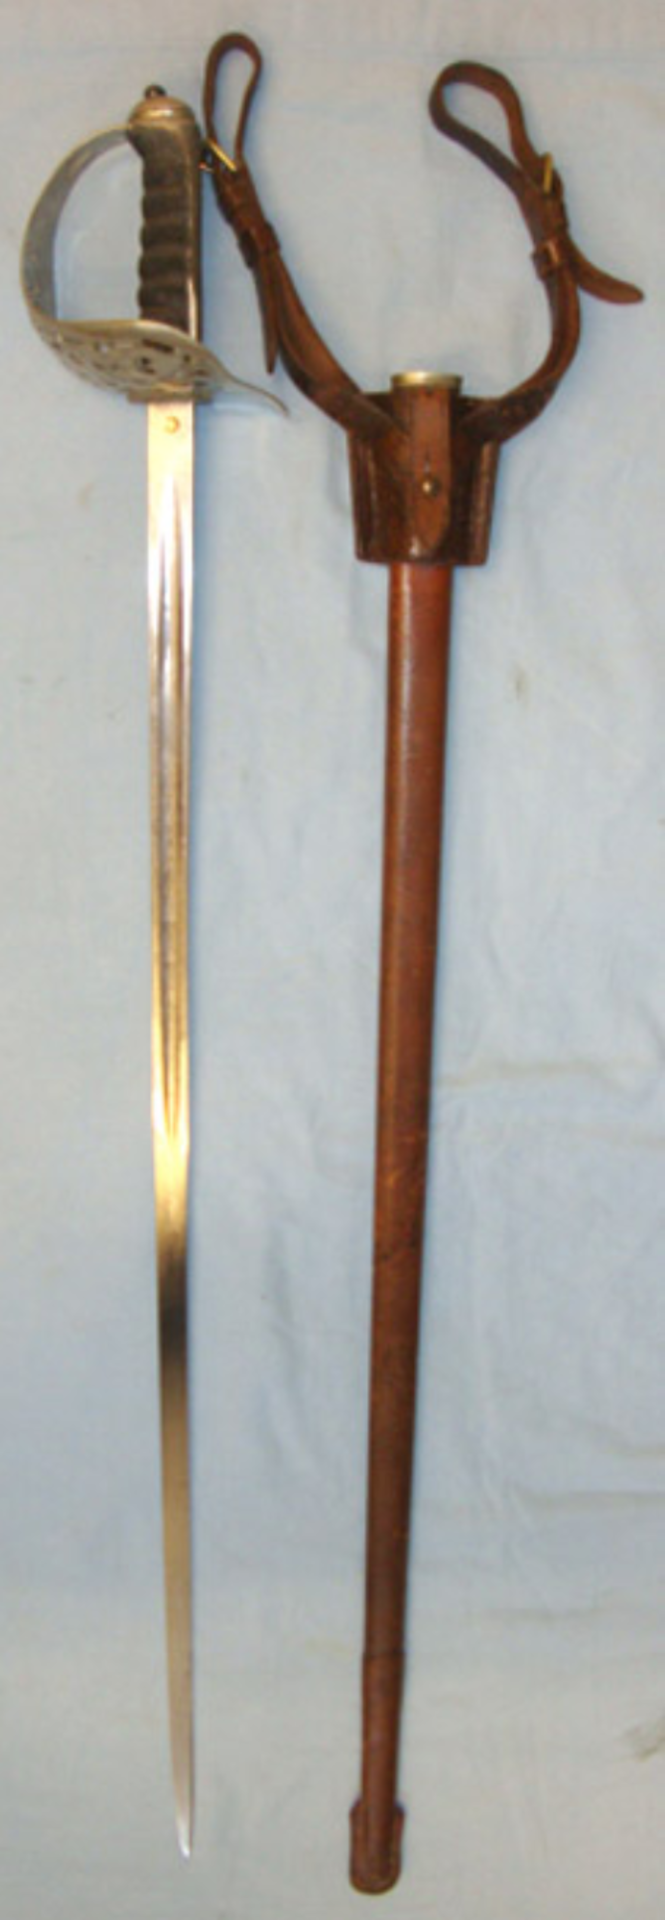 Victorian British 1895 Pattern Infantry Officer's Sword With Etched Blade By Mole & Sons Birmingham